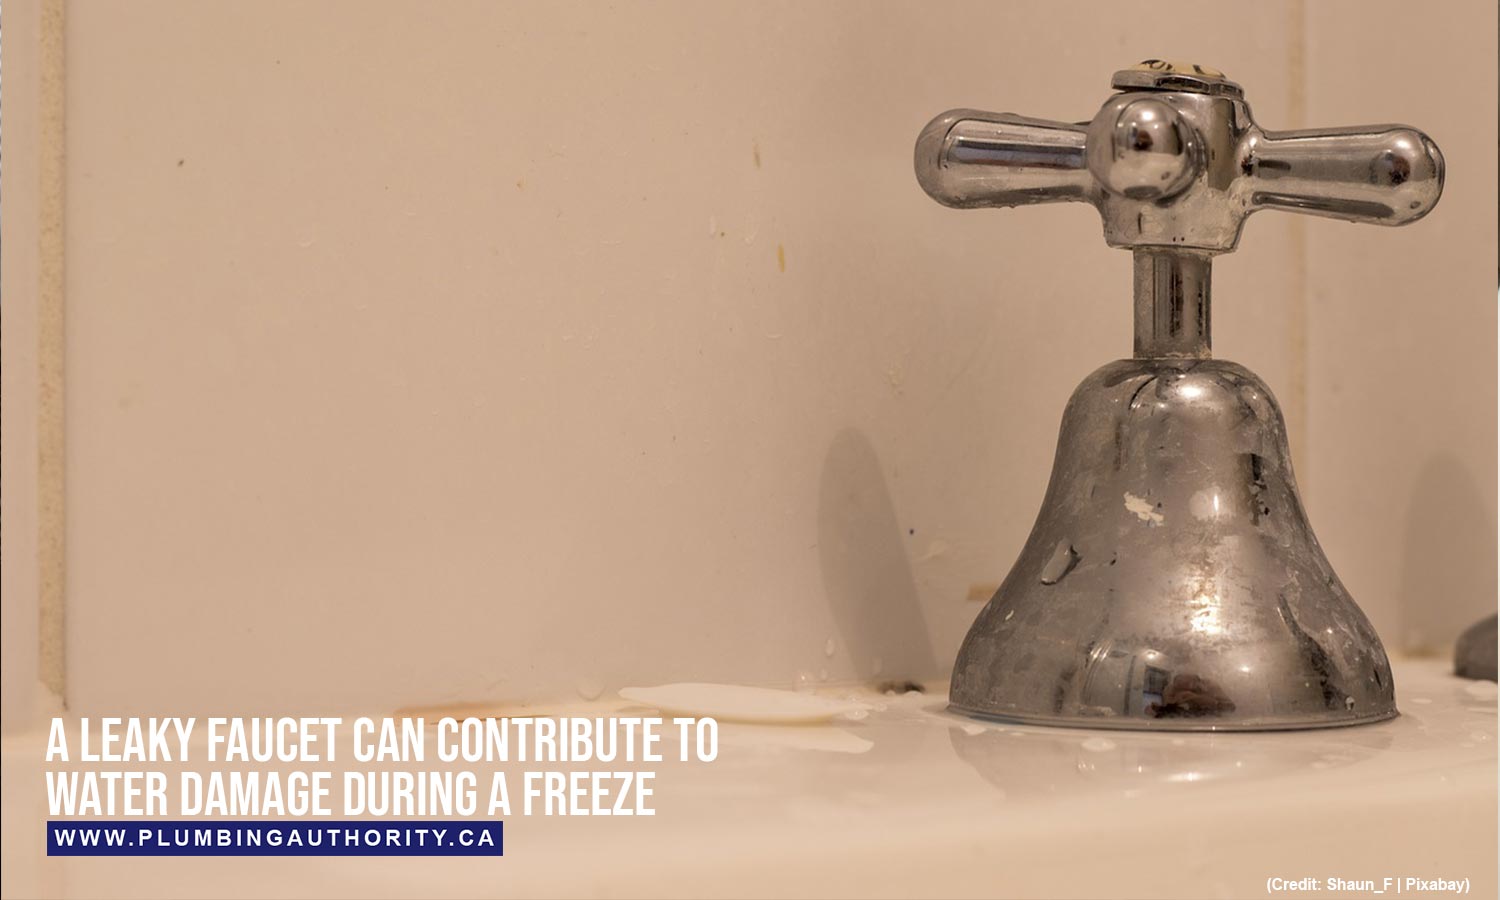 A leaky faucet can contribute to water damage